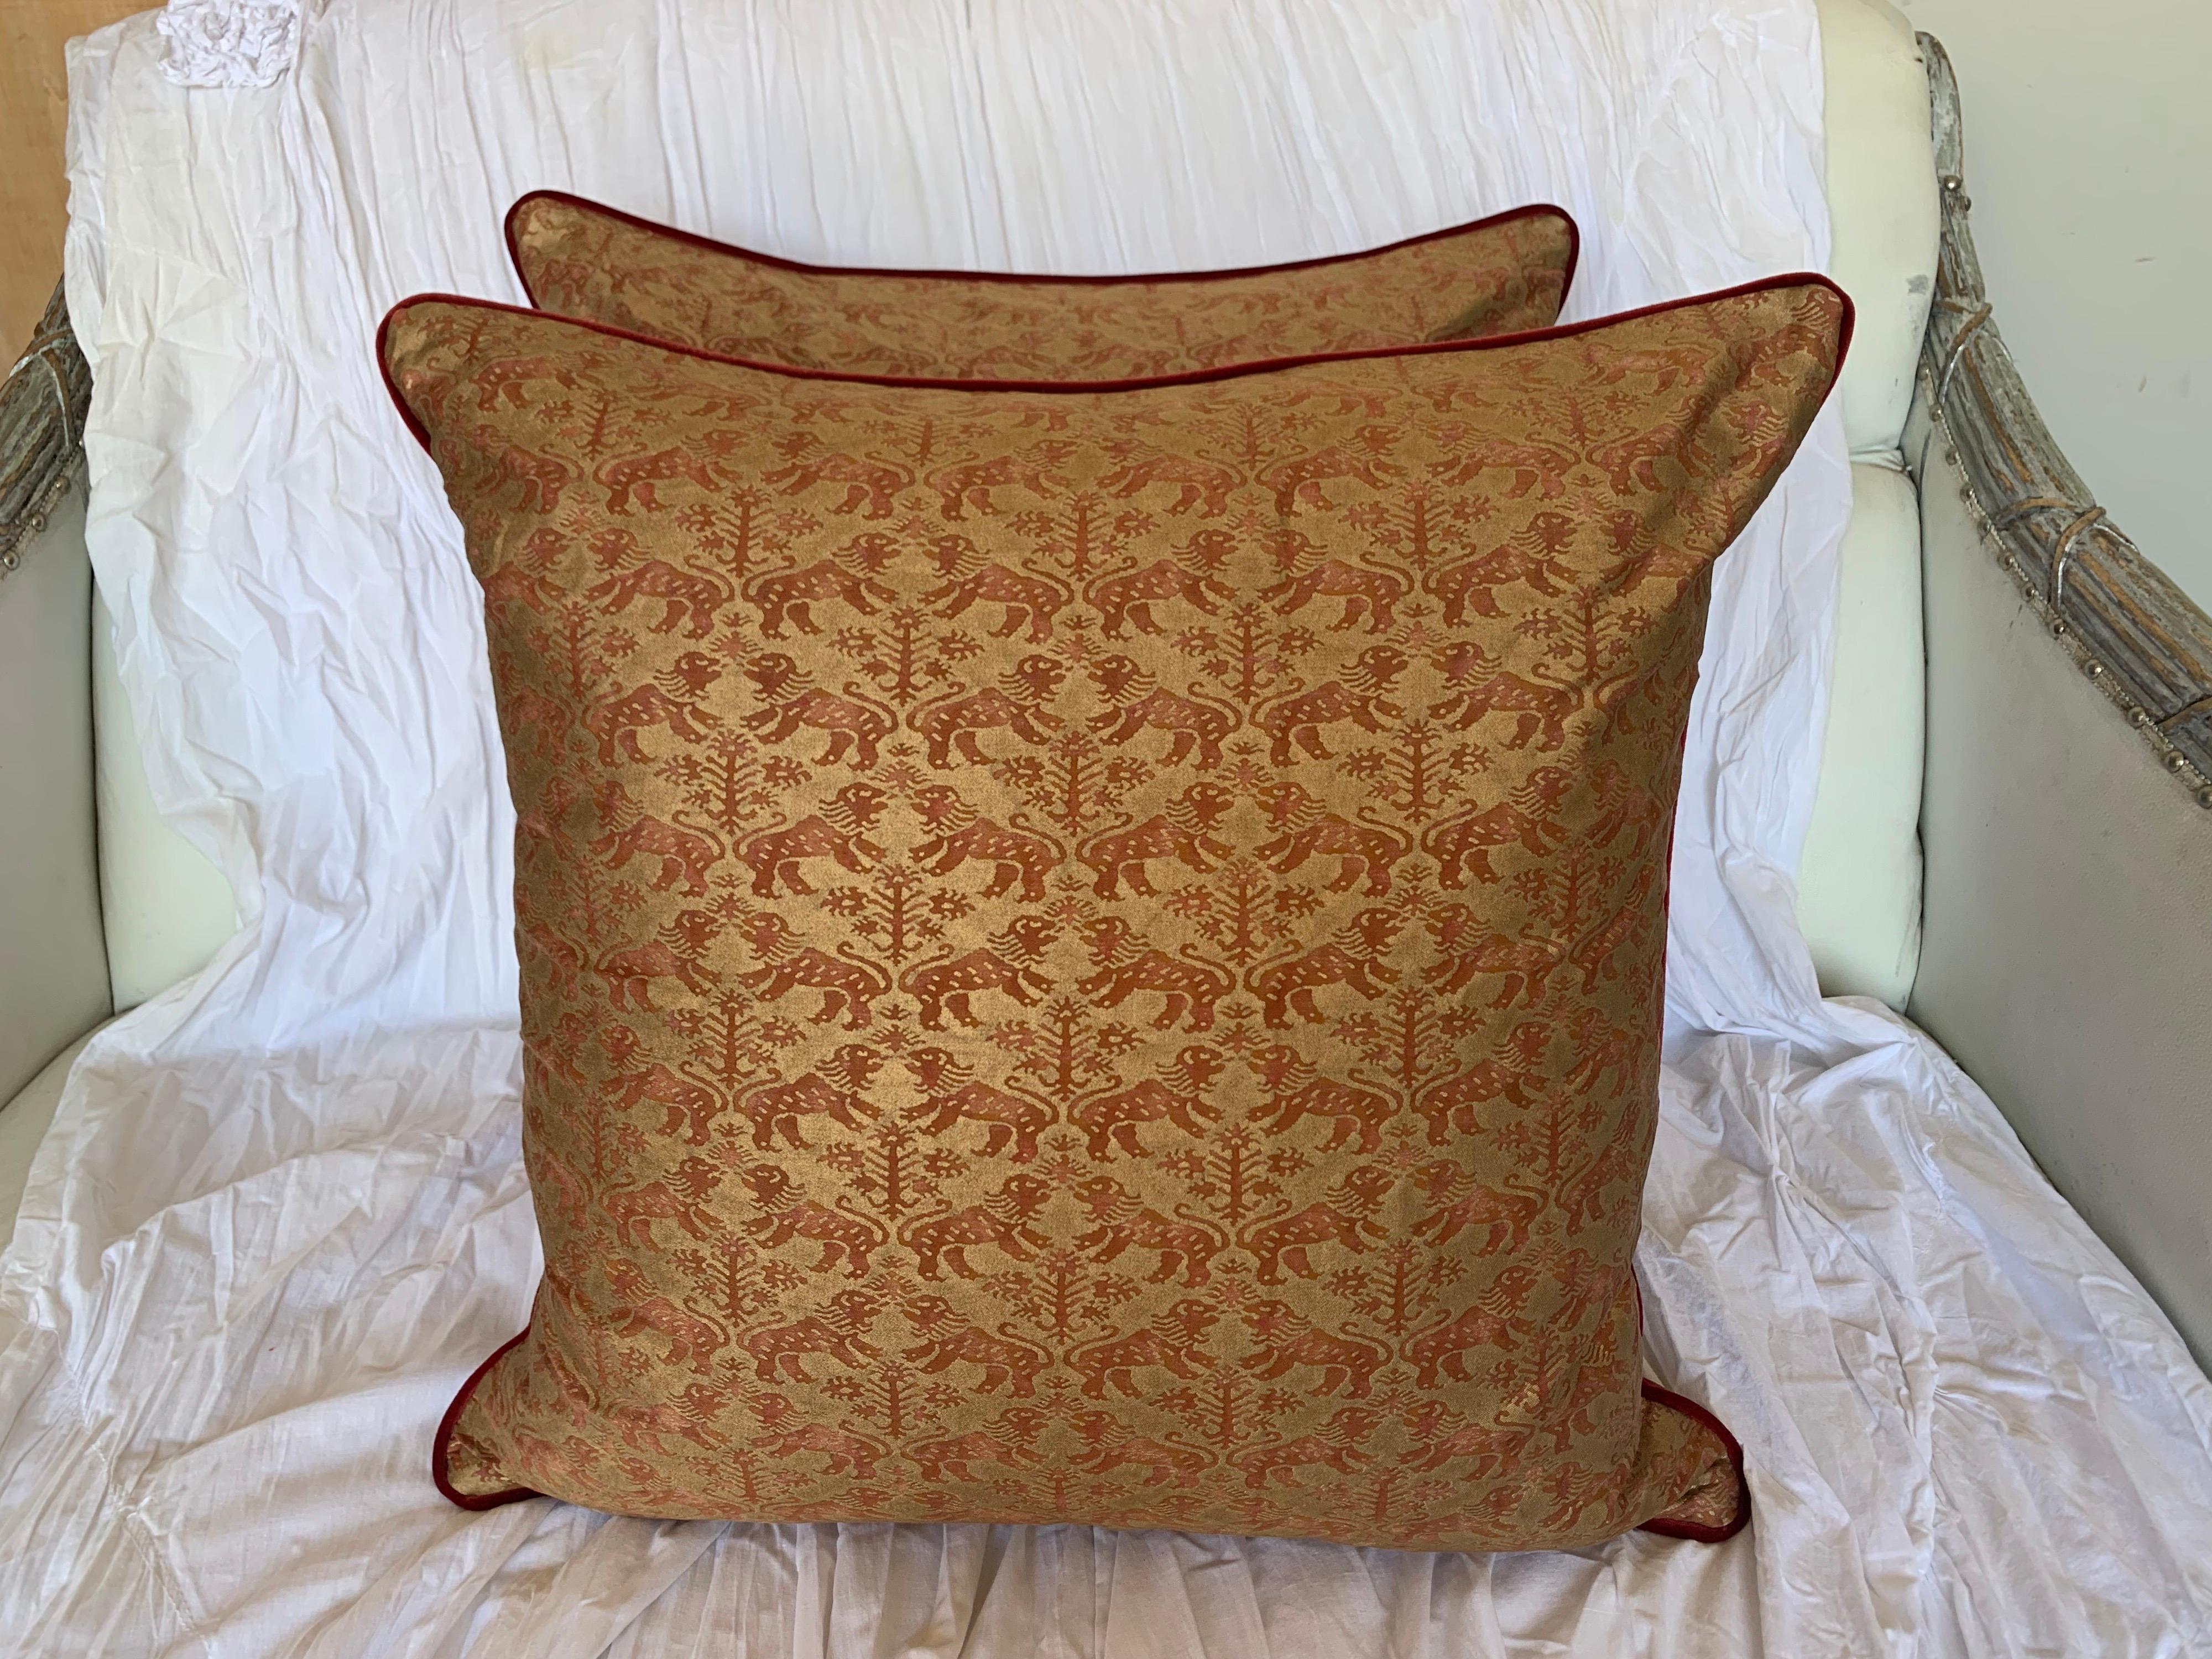 Pair of custom Richelieu patterned Fortuny pillows depicting Venetian lions in red & gold. The backs are velvet and the pillows are finished with a self cording. Down inserts, sewn closed.